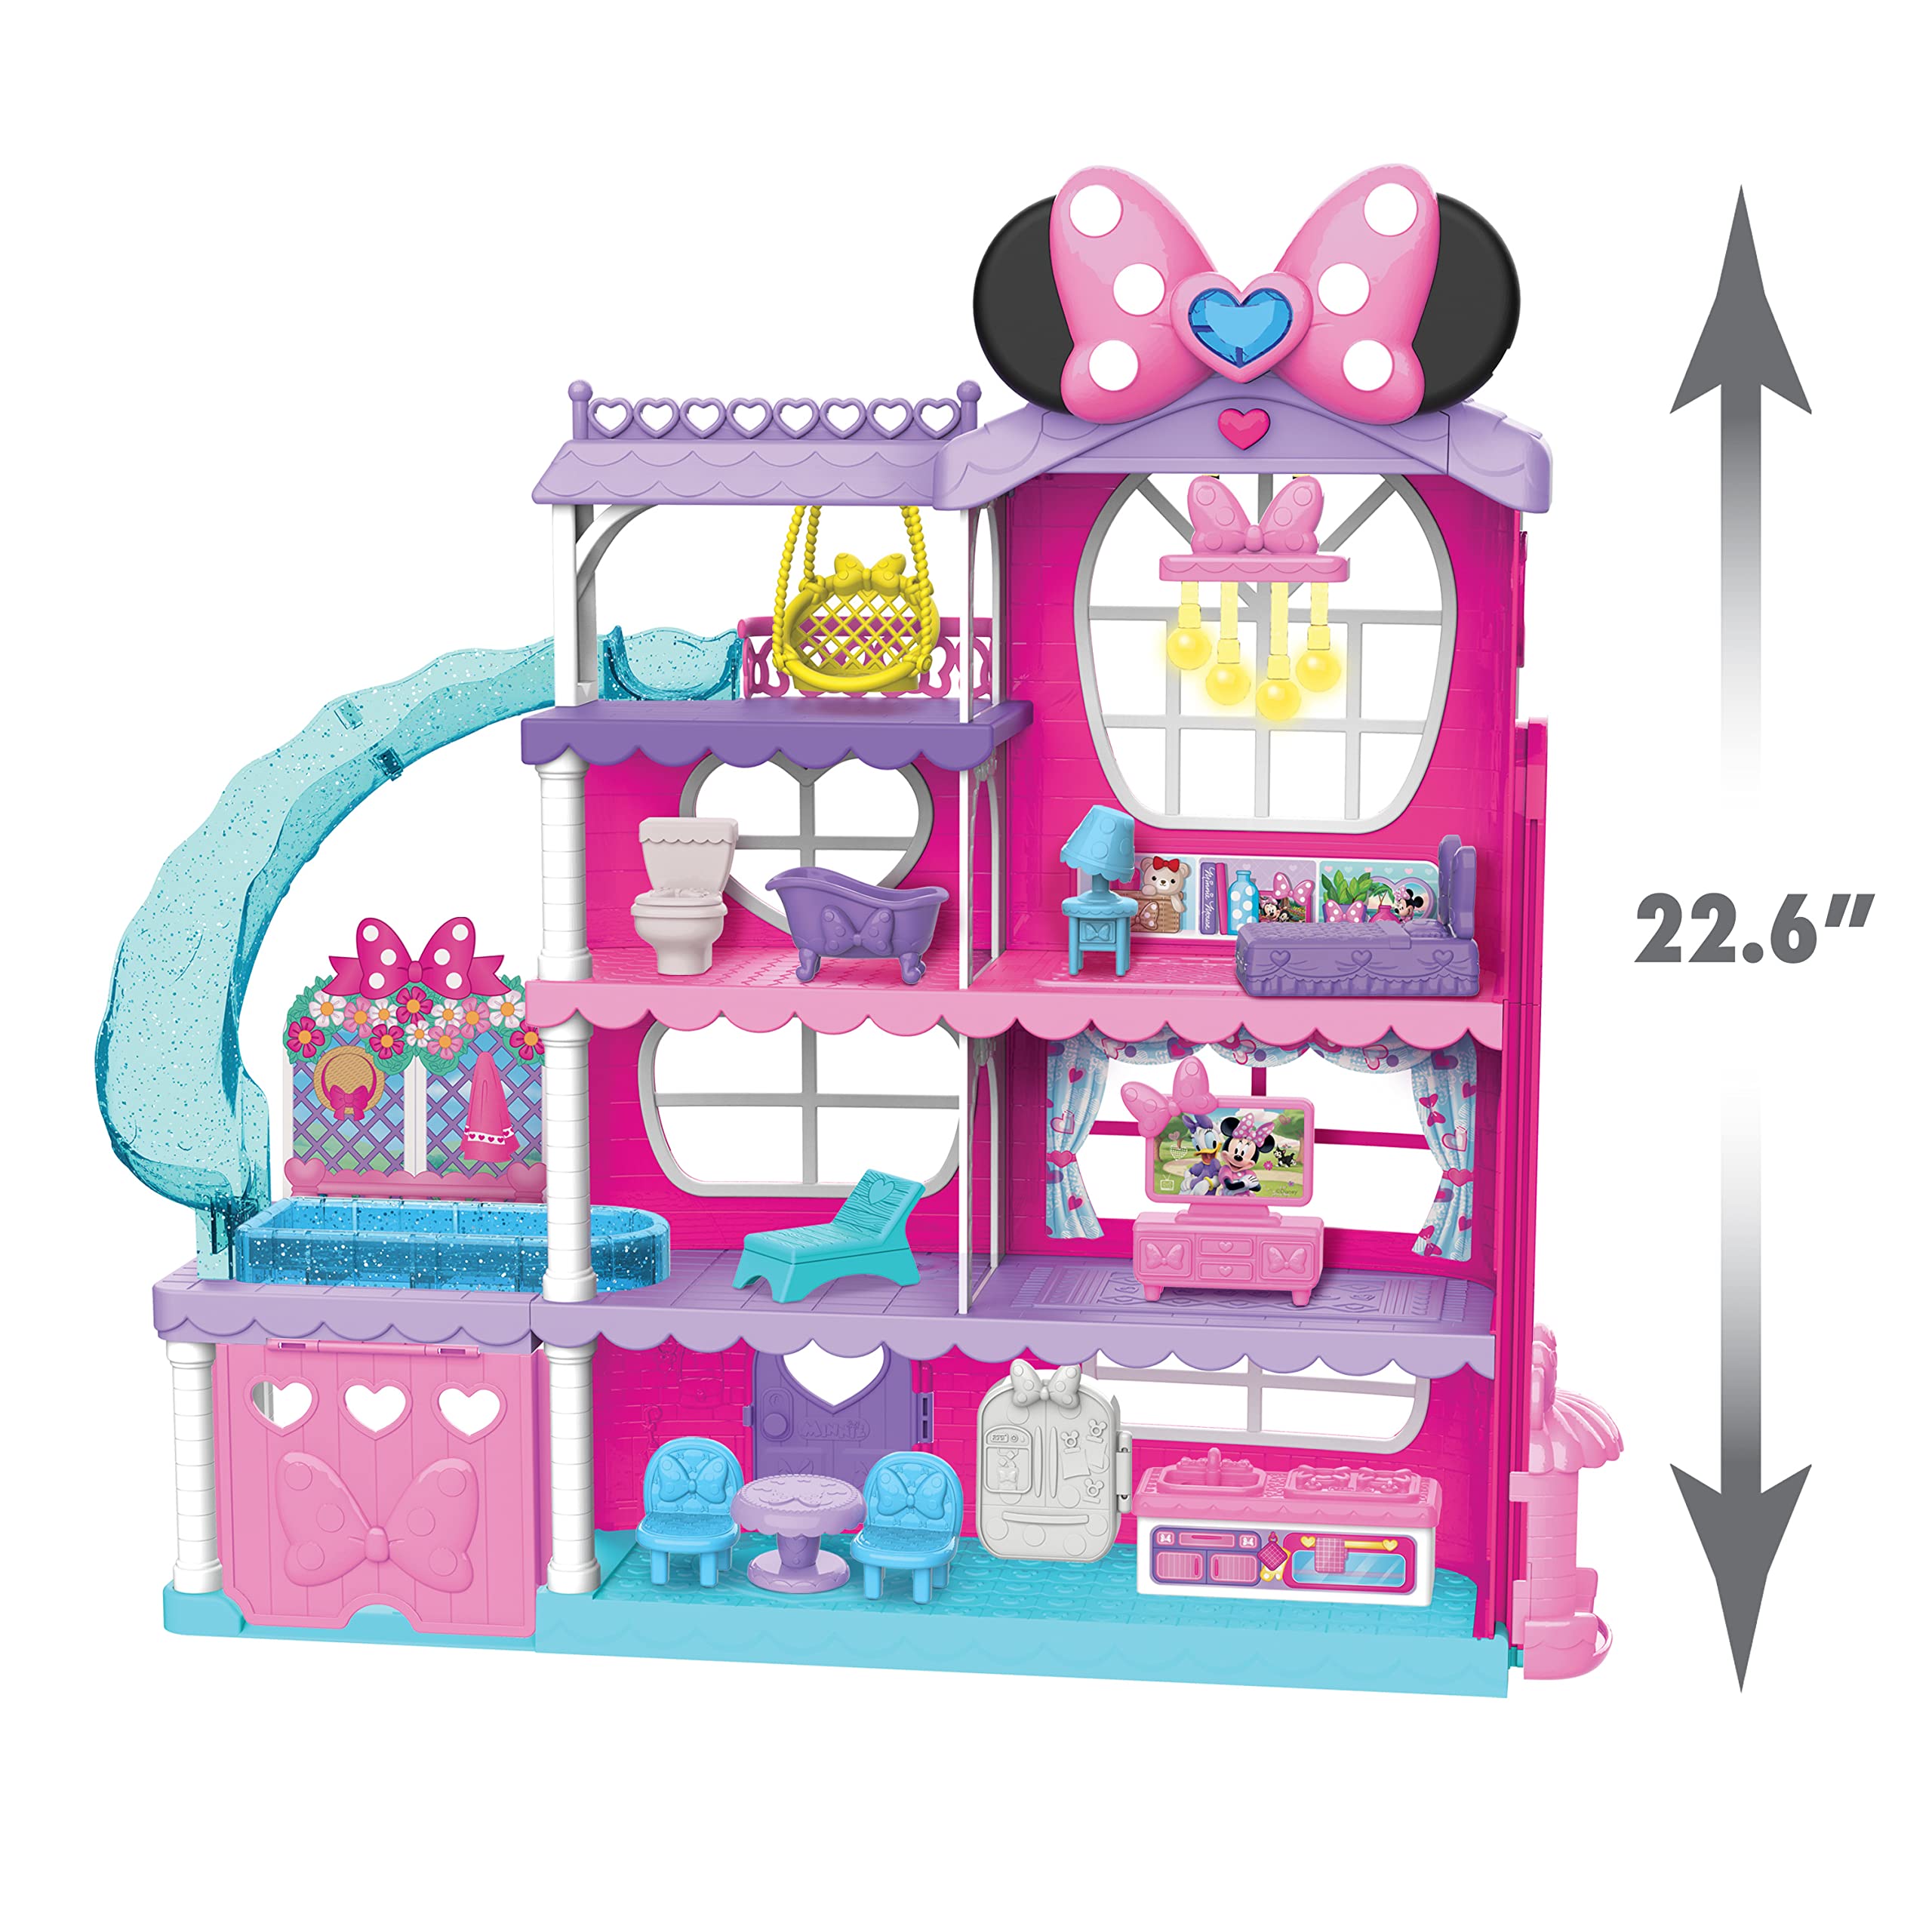 Disney Junior Minnie Mouse Ultimate Mansion 22-inch Playset with Bonus Figures, 23-piece Toy Figures and Playset, Kids Toys for Ages 3 Up, Amazon Exclusive